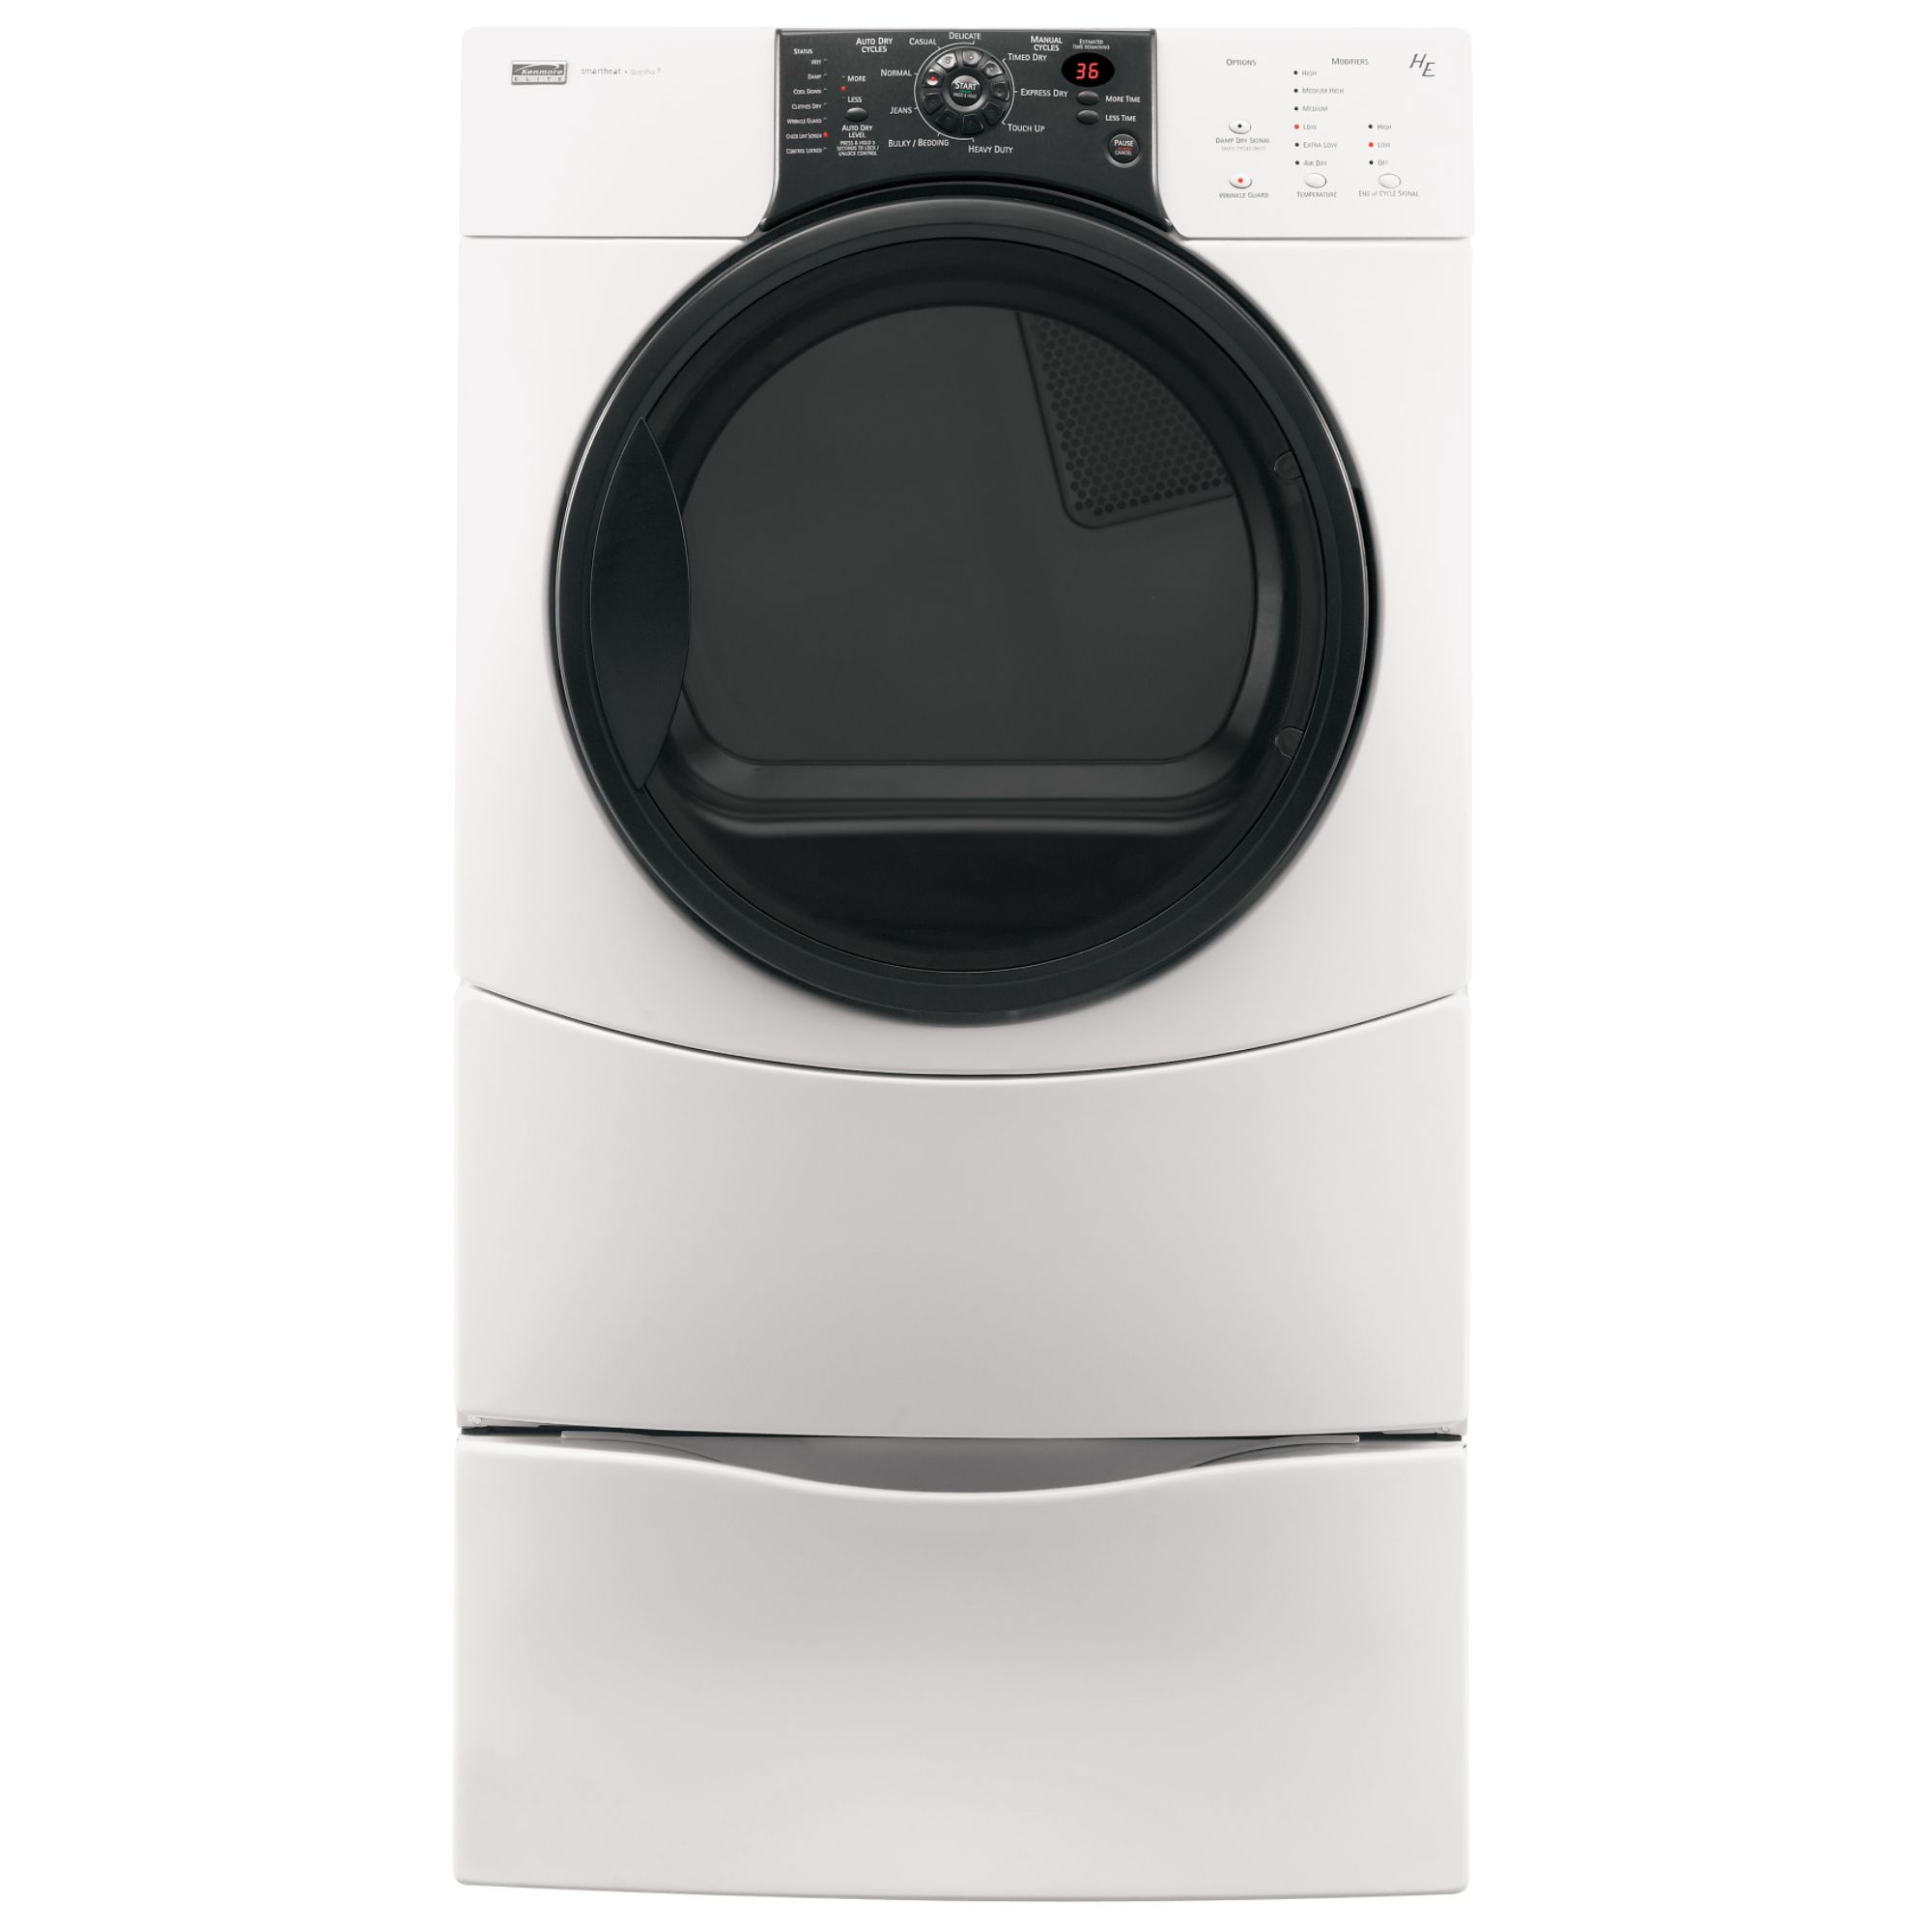 How do you troubleshoot a Kenmore Elite Model 110 washer?